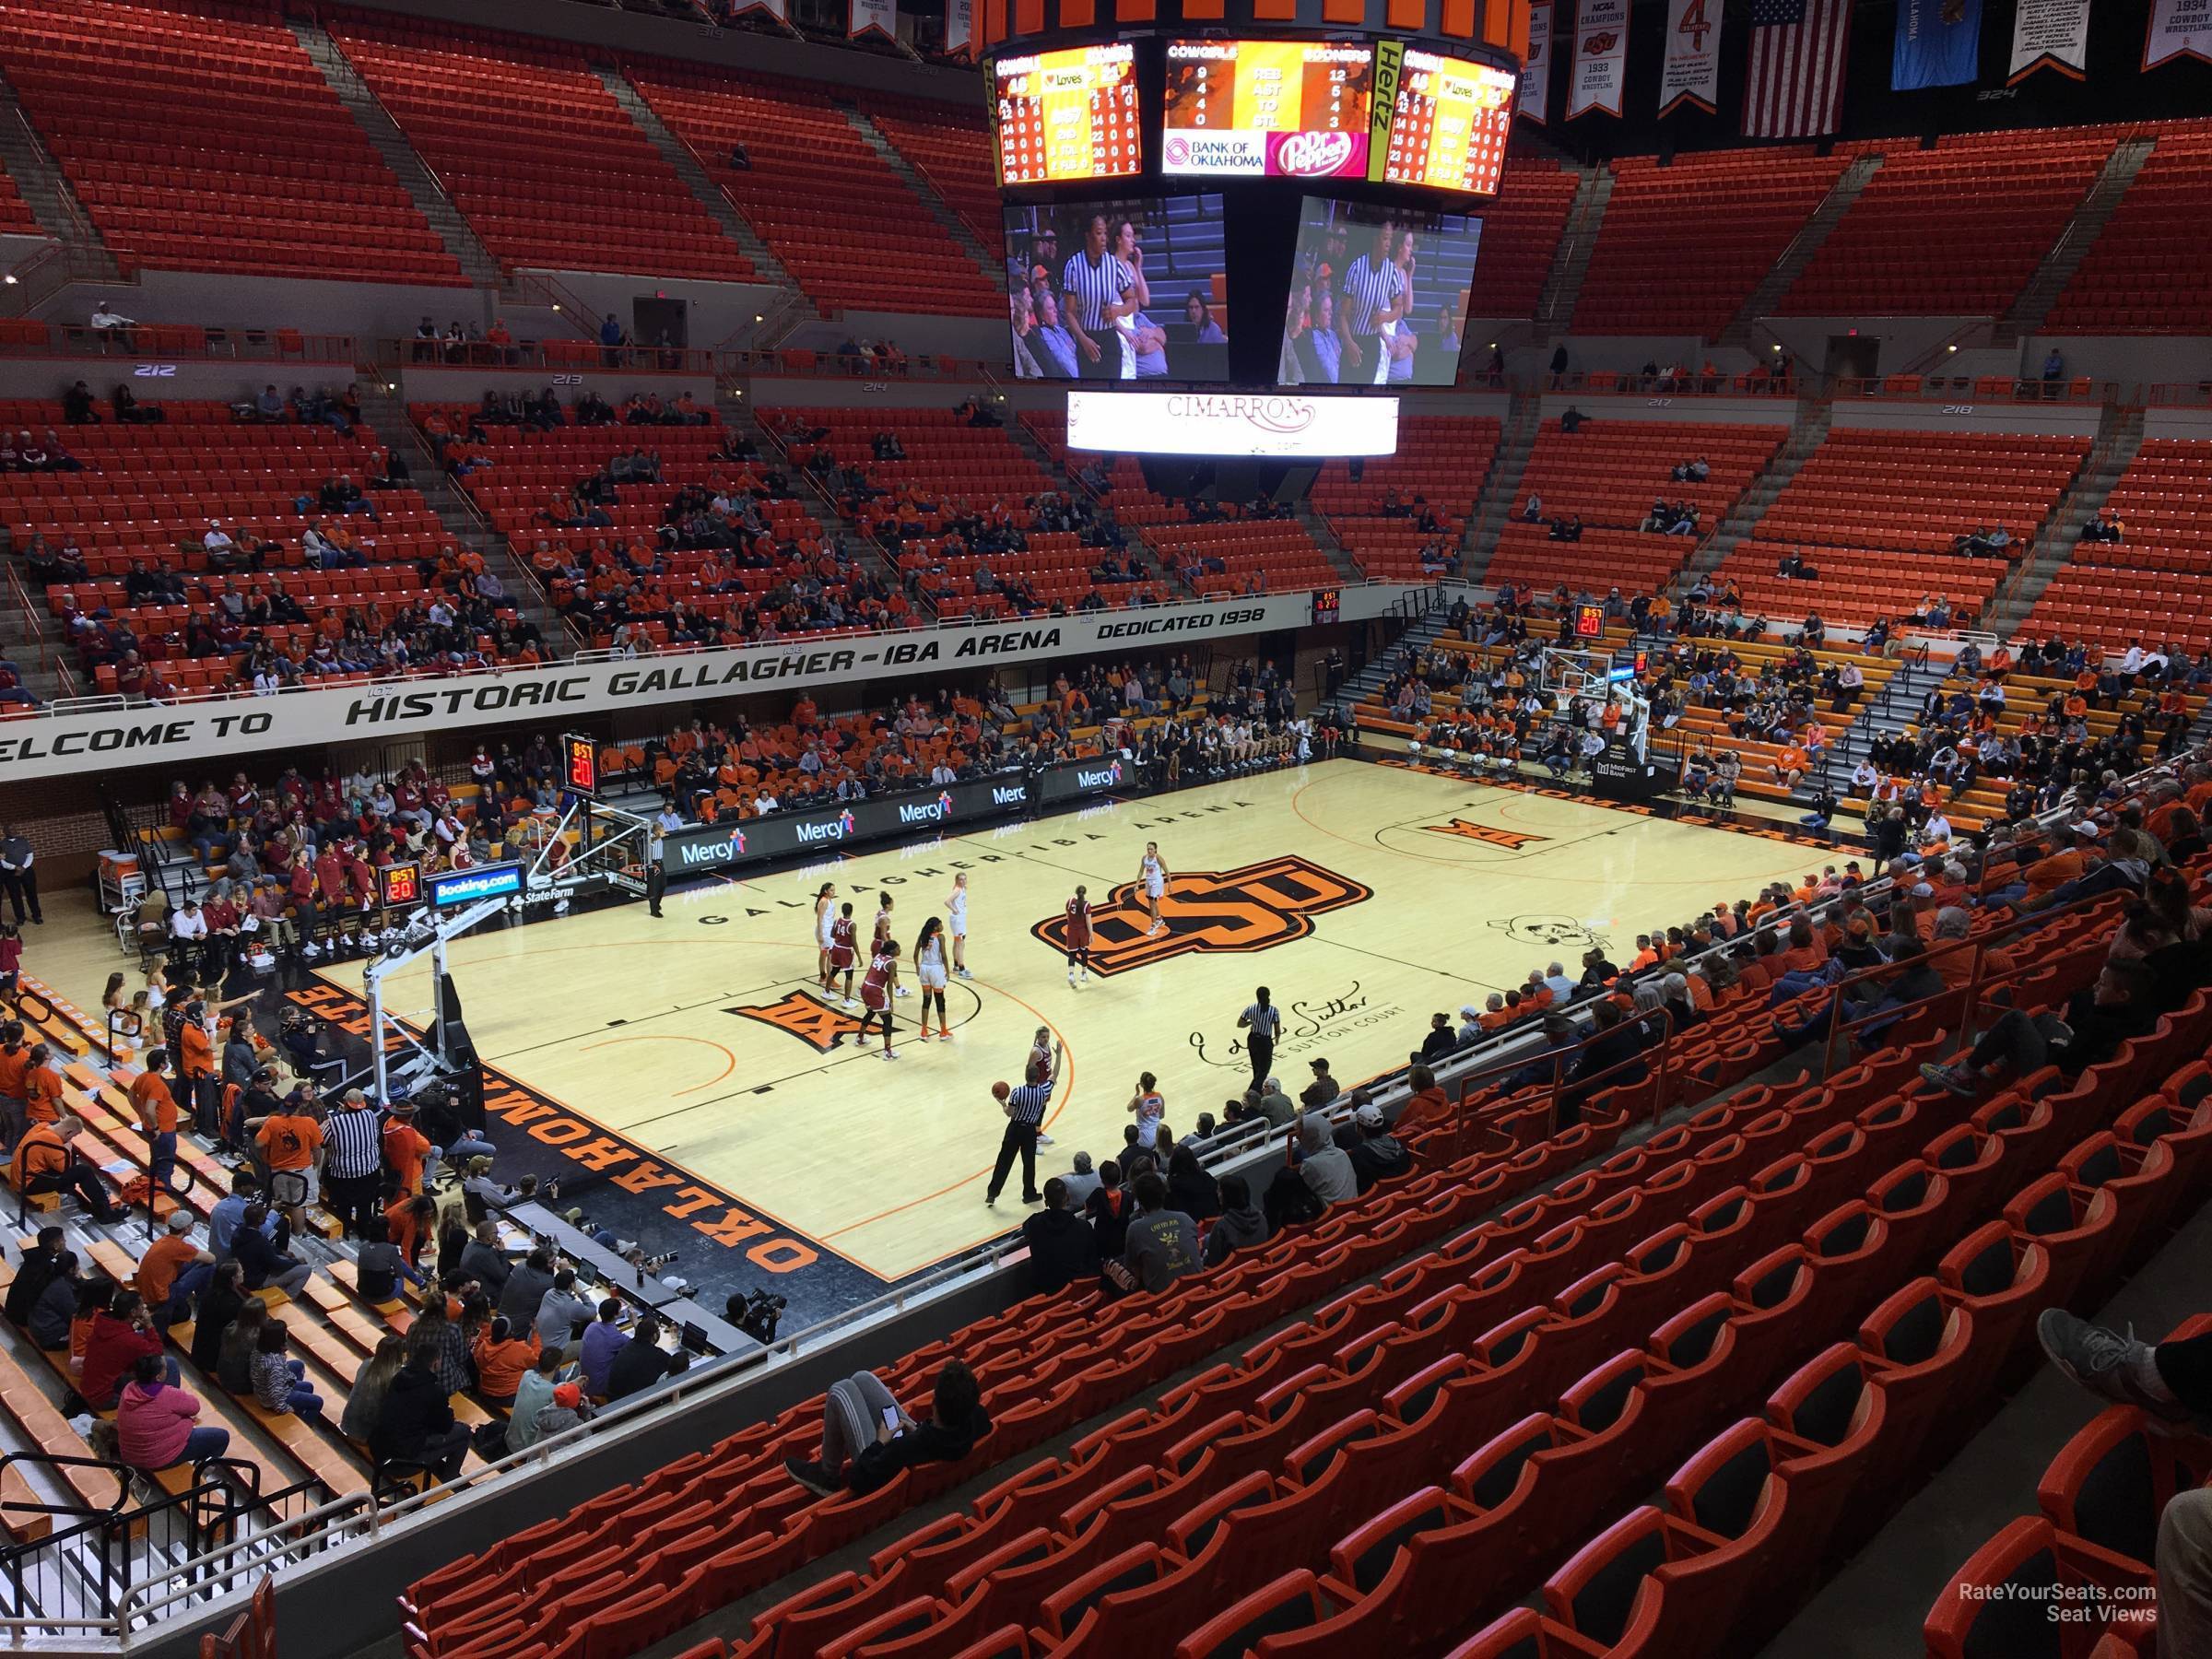 section 205, row 13 seat view  - gallagher-iba arena